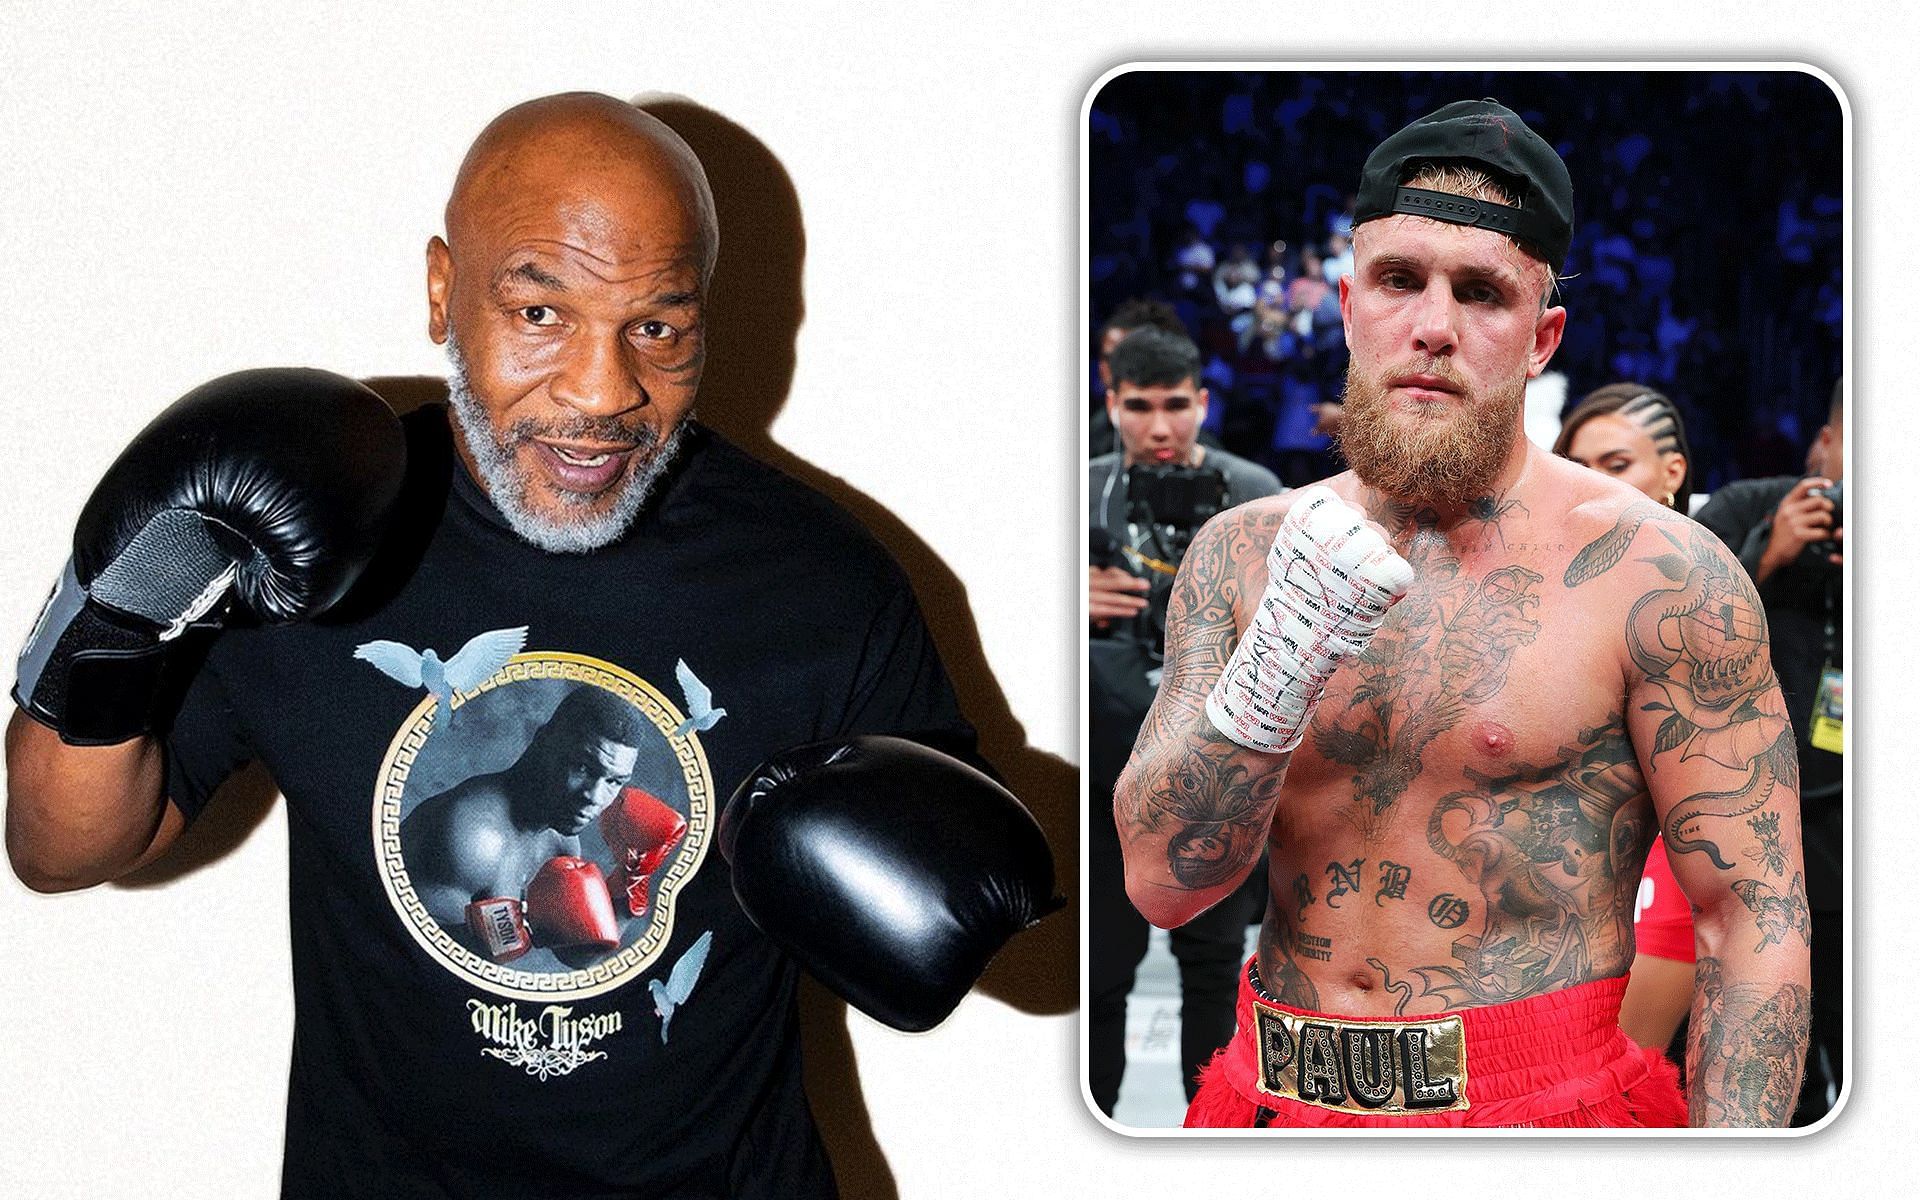 Deontay Wilder shows concern for Mike Tyson (left) ahead of his fight against Jake Paul (right) [Images courtesy: @miketyson on Instagram and Getty]